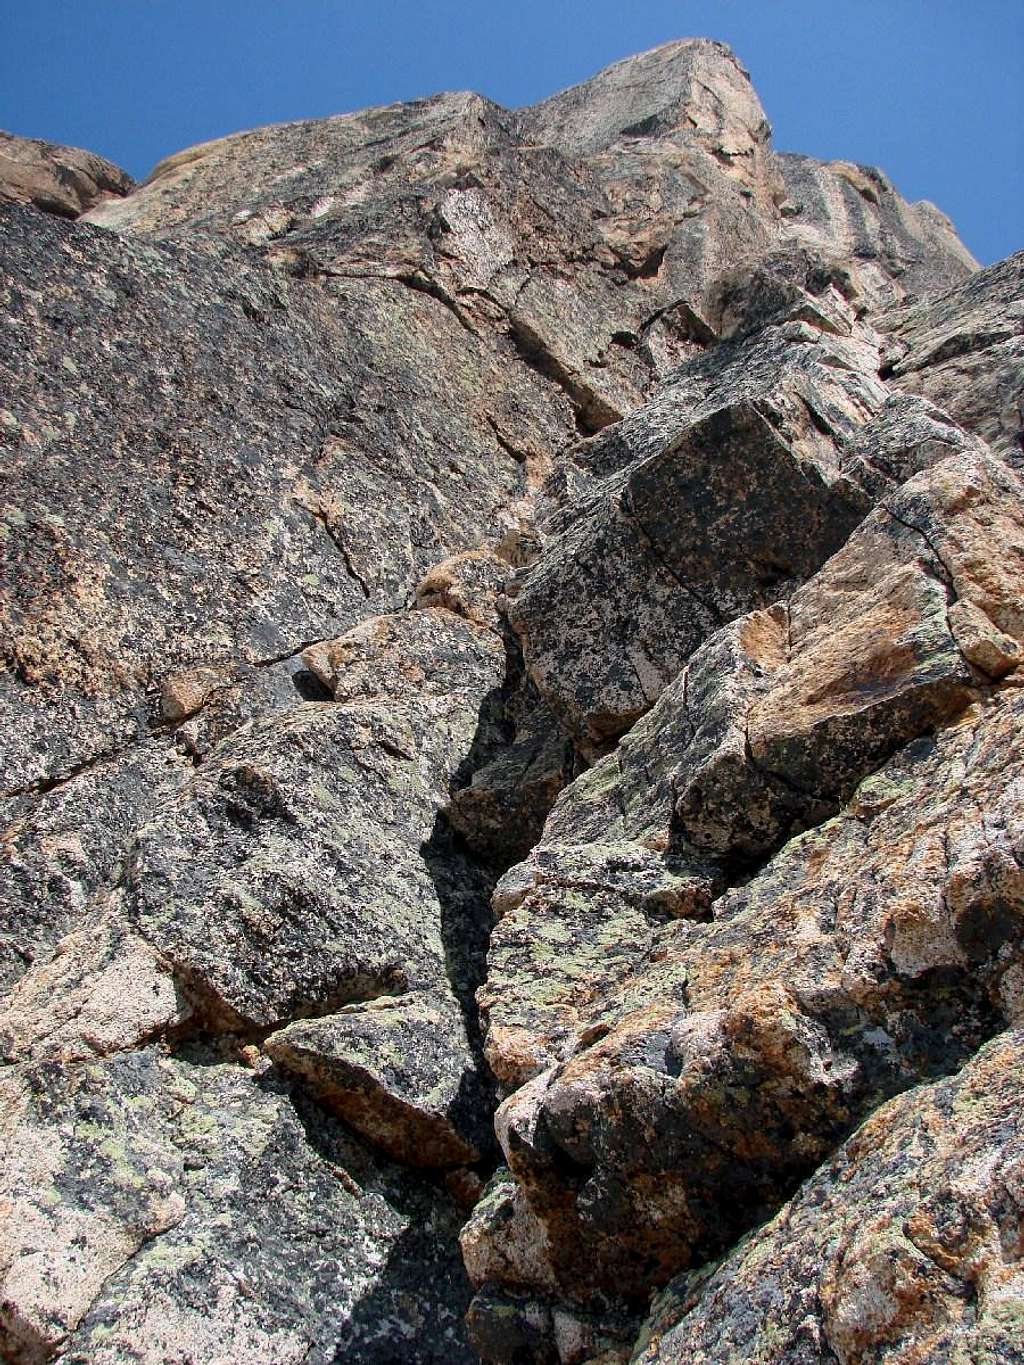 1st pitch of the Beckey Route